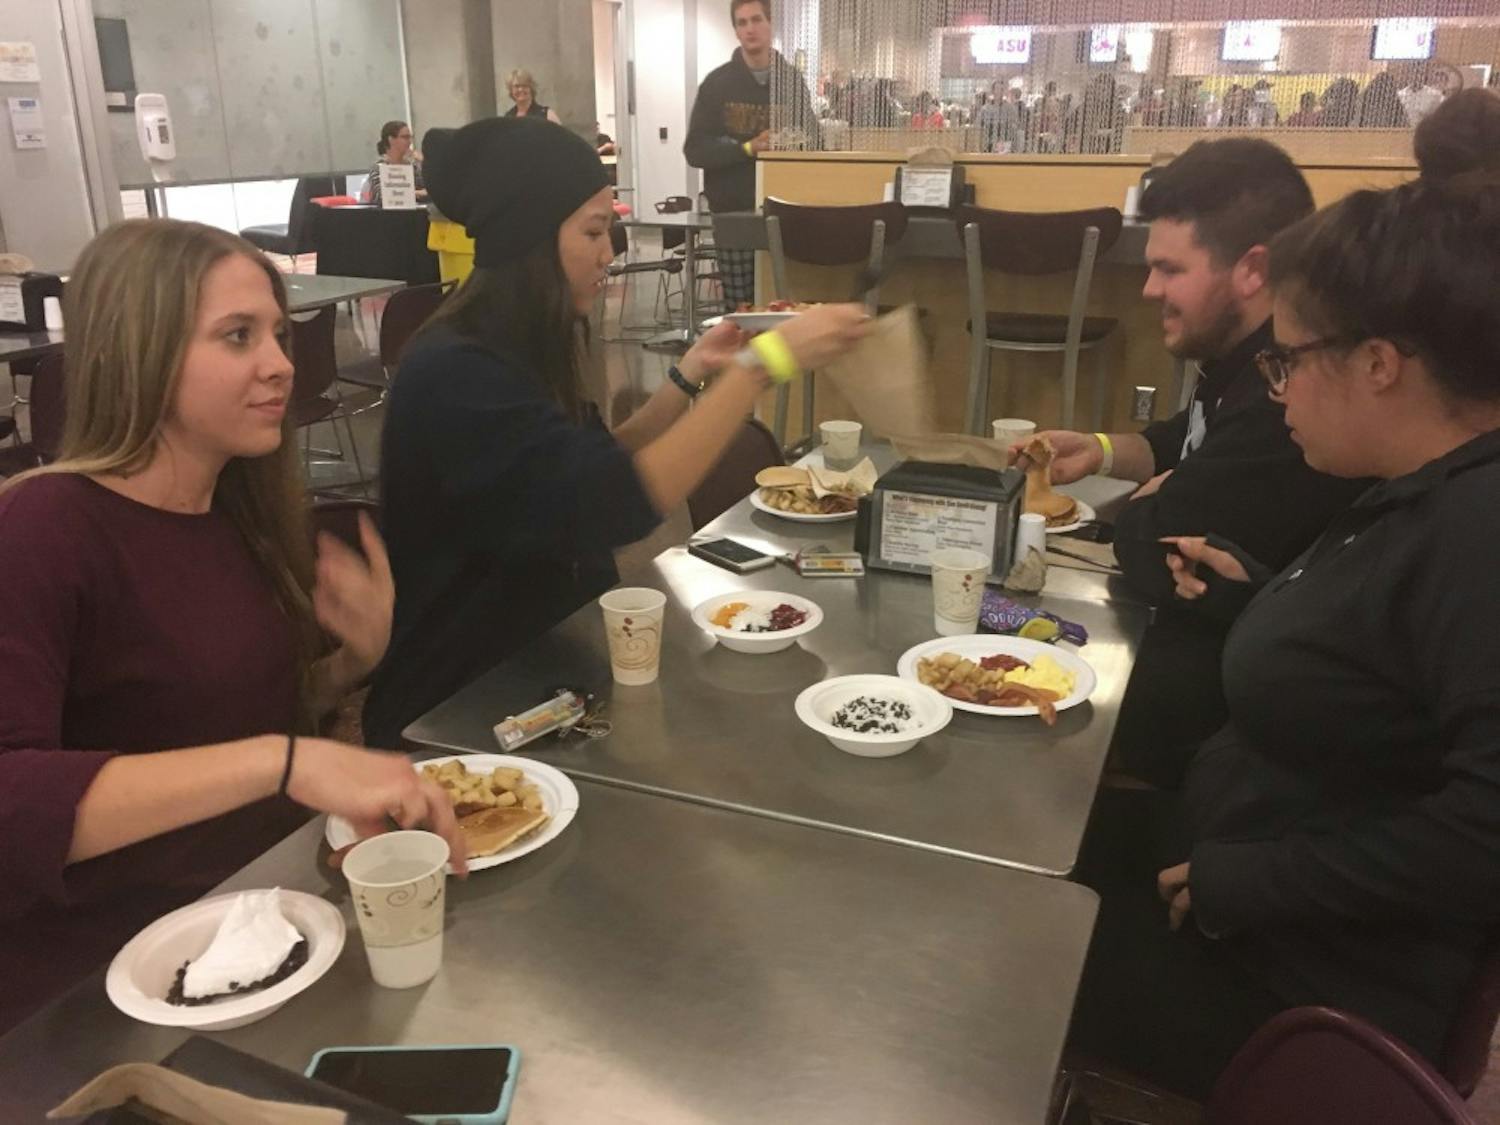 Students enjoy breakfast for dinner as part of the finals dinner hosted at the Taylor Place dining hall on Nov. 30.